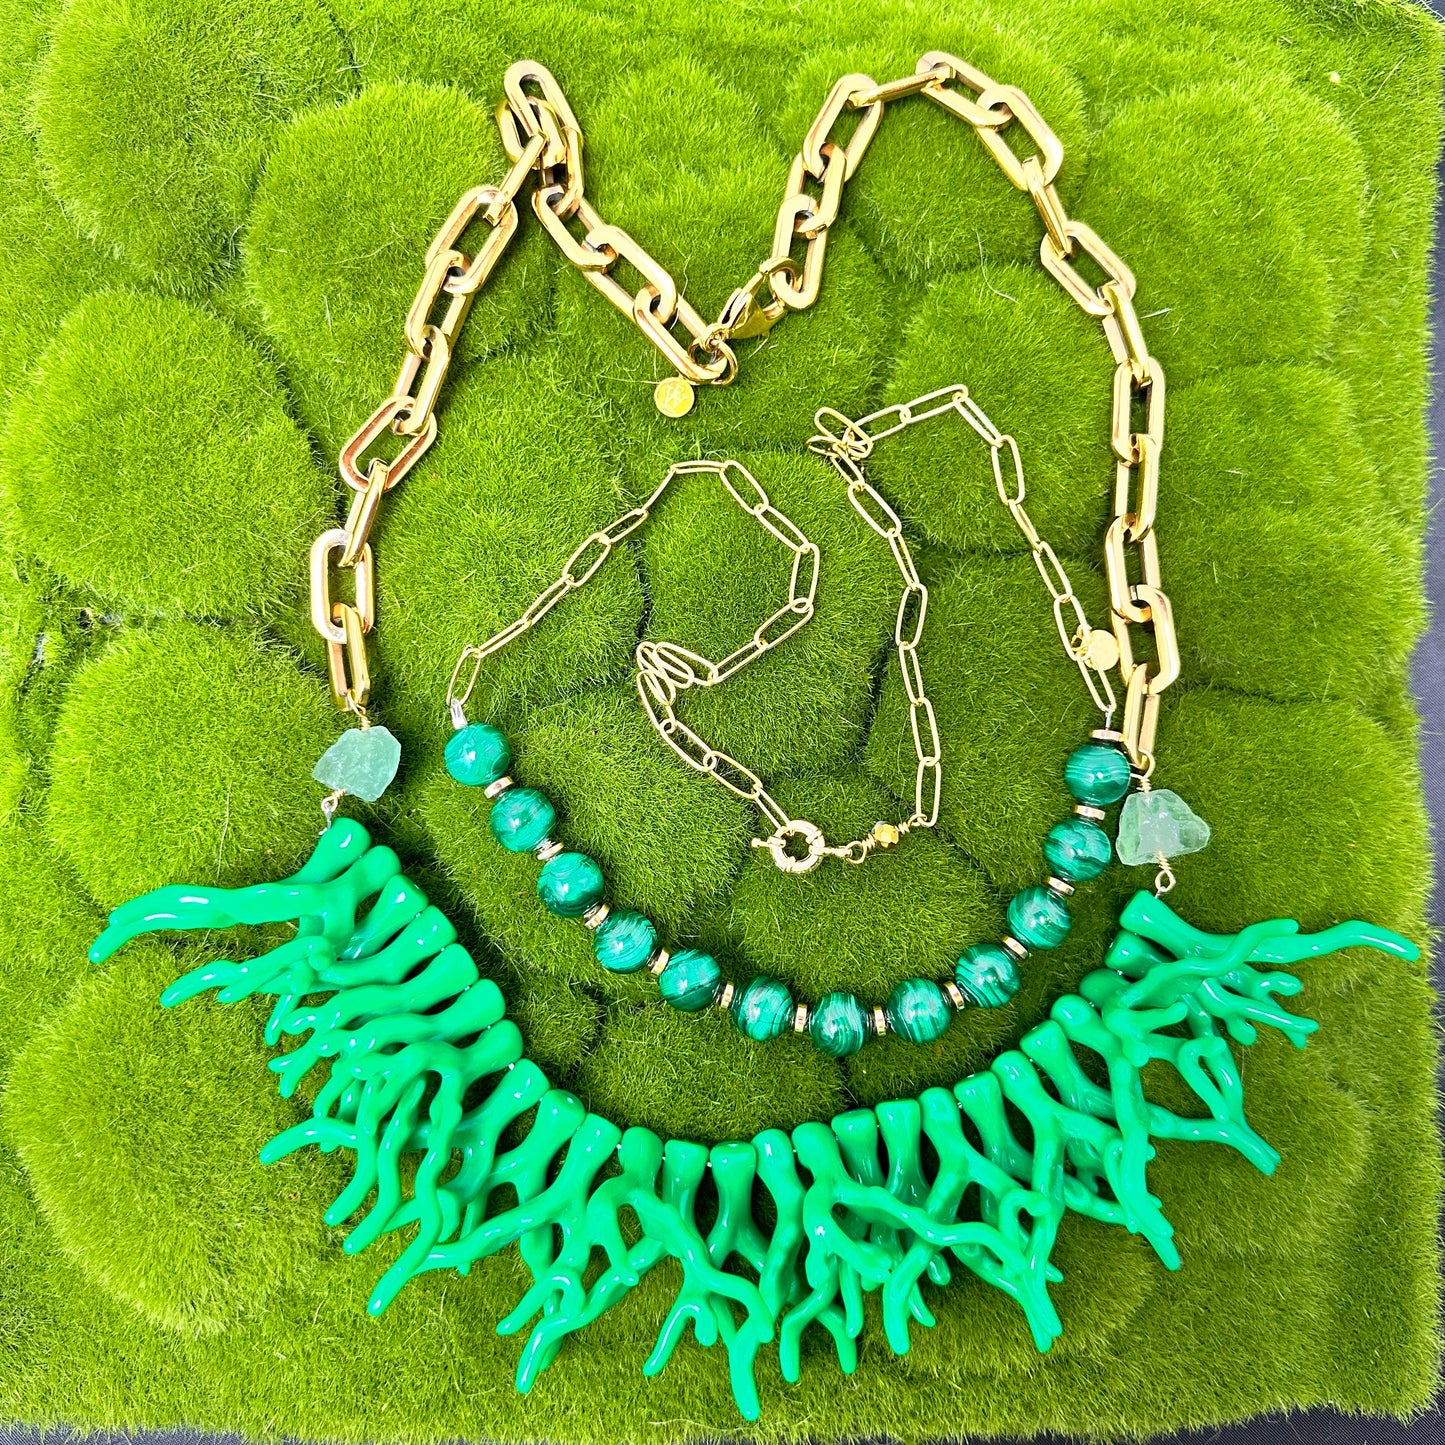 Malachite beads with stainless steel chain necklace 310-18 | Erika Williner Designs